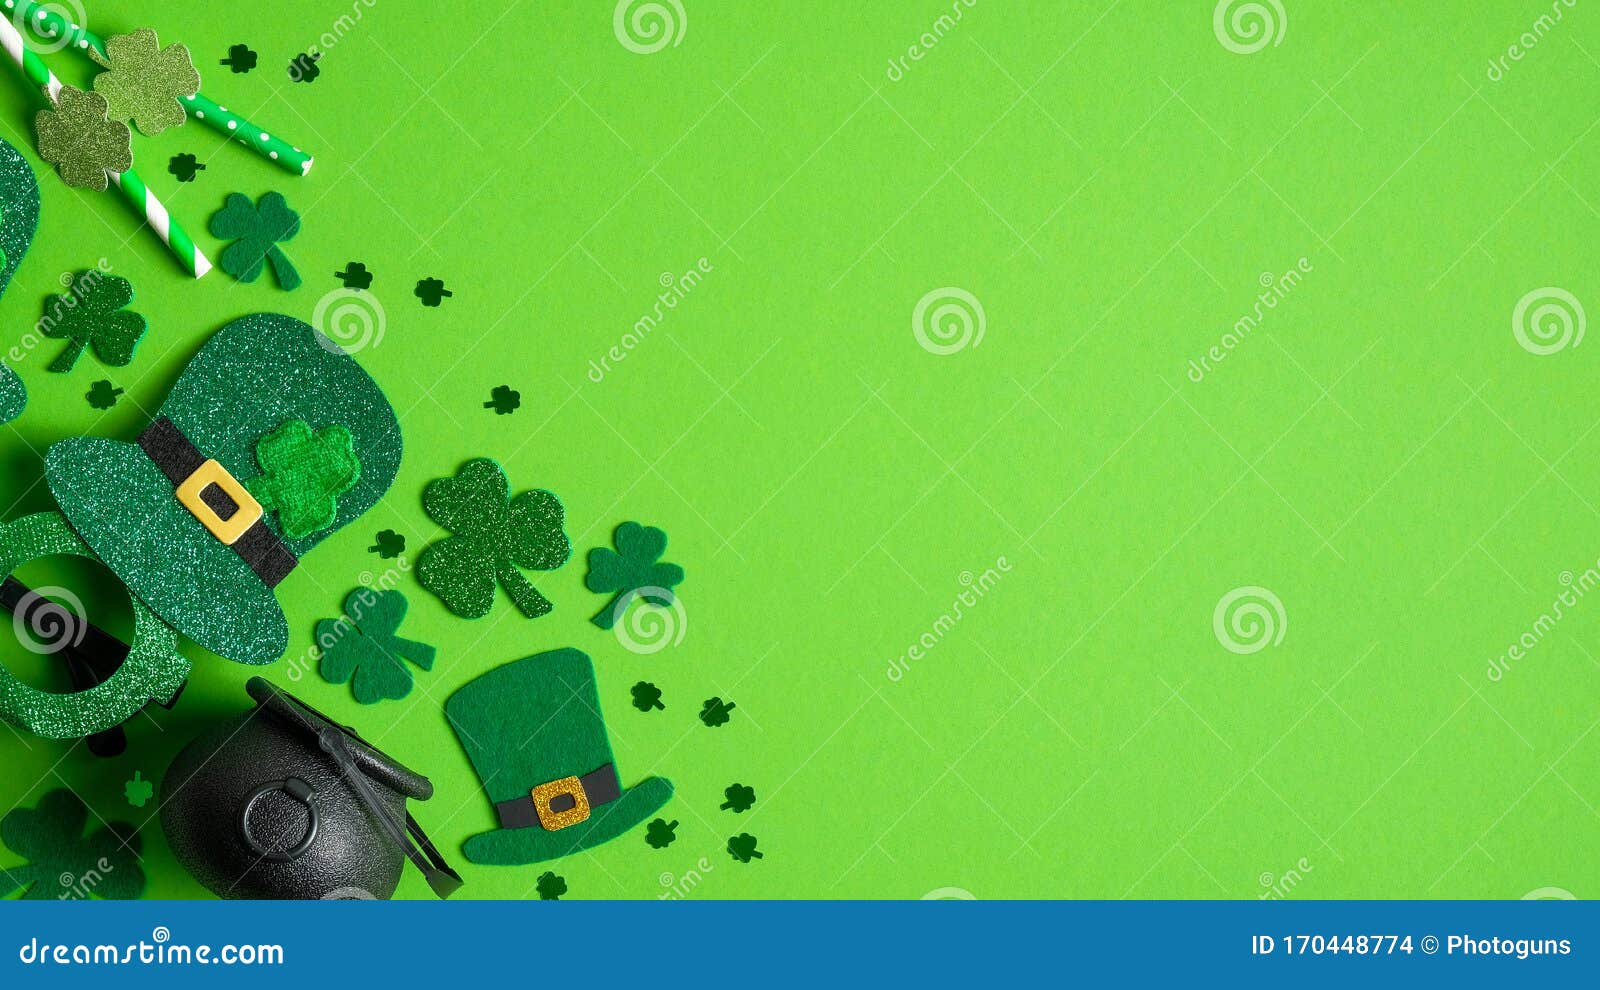 Laeacco 8x6.5ft St.Patricks Day Backdrops Vinyl March 17th Radio Clock Green Hat Lucky Clover Background Ireland Traditional Festival Event Photo Studio Community Activities Luck Banner Hope 